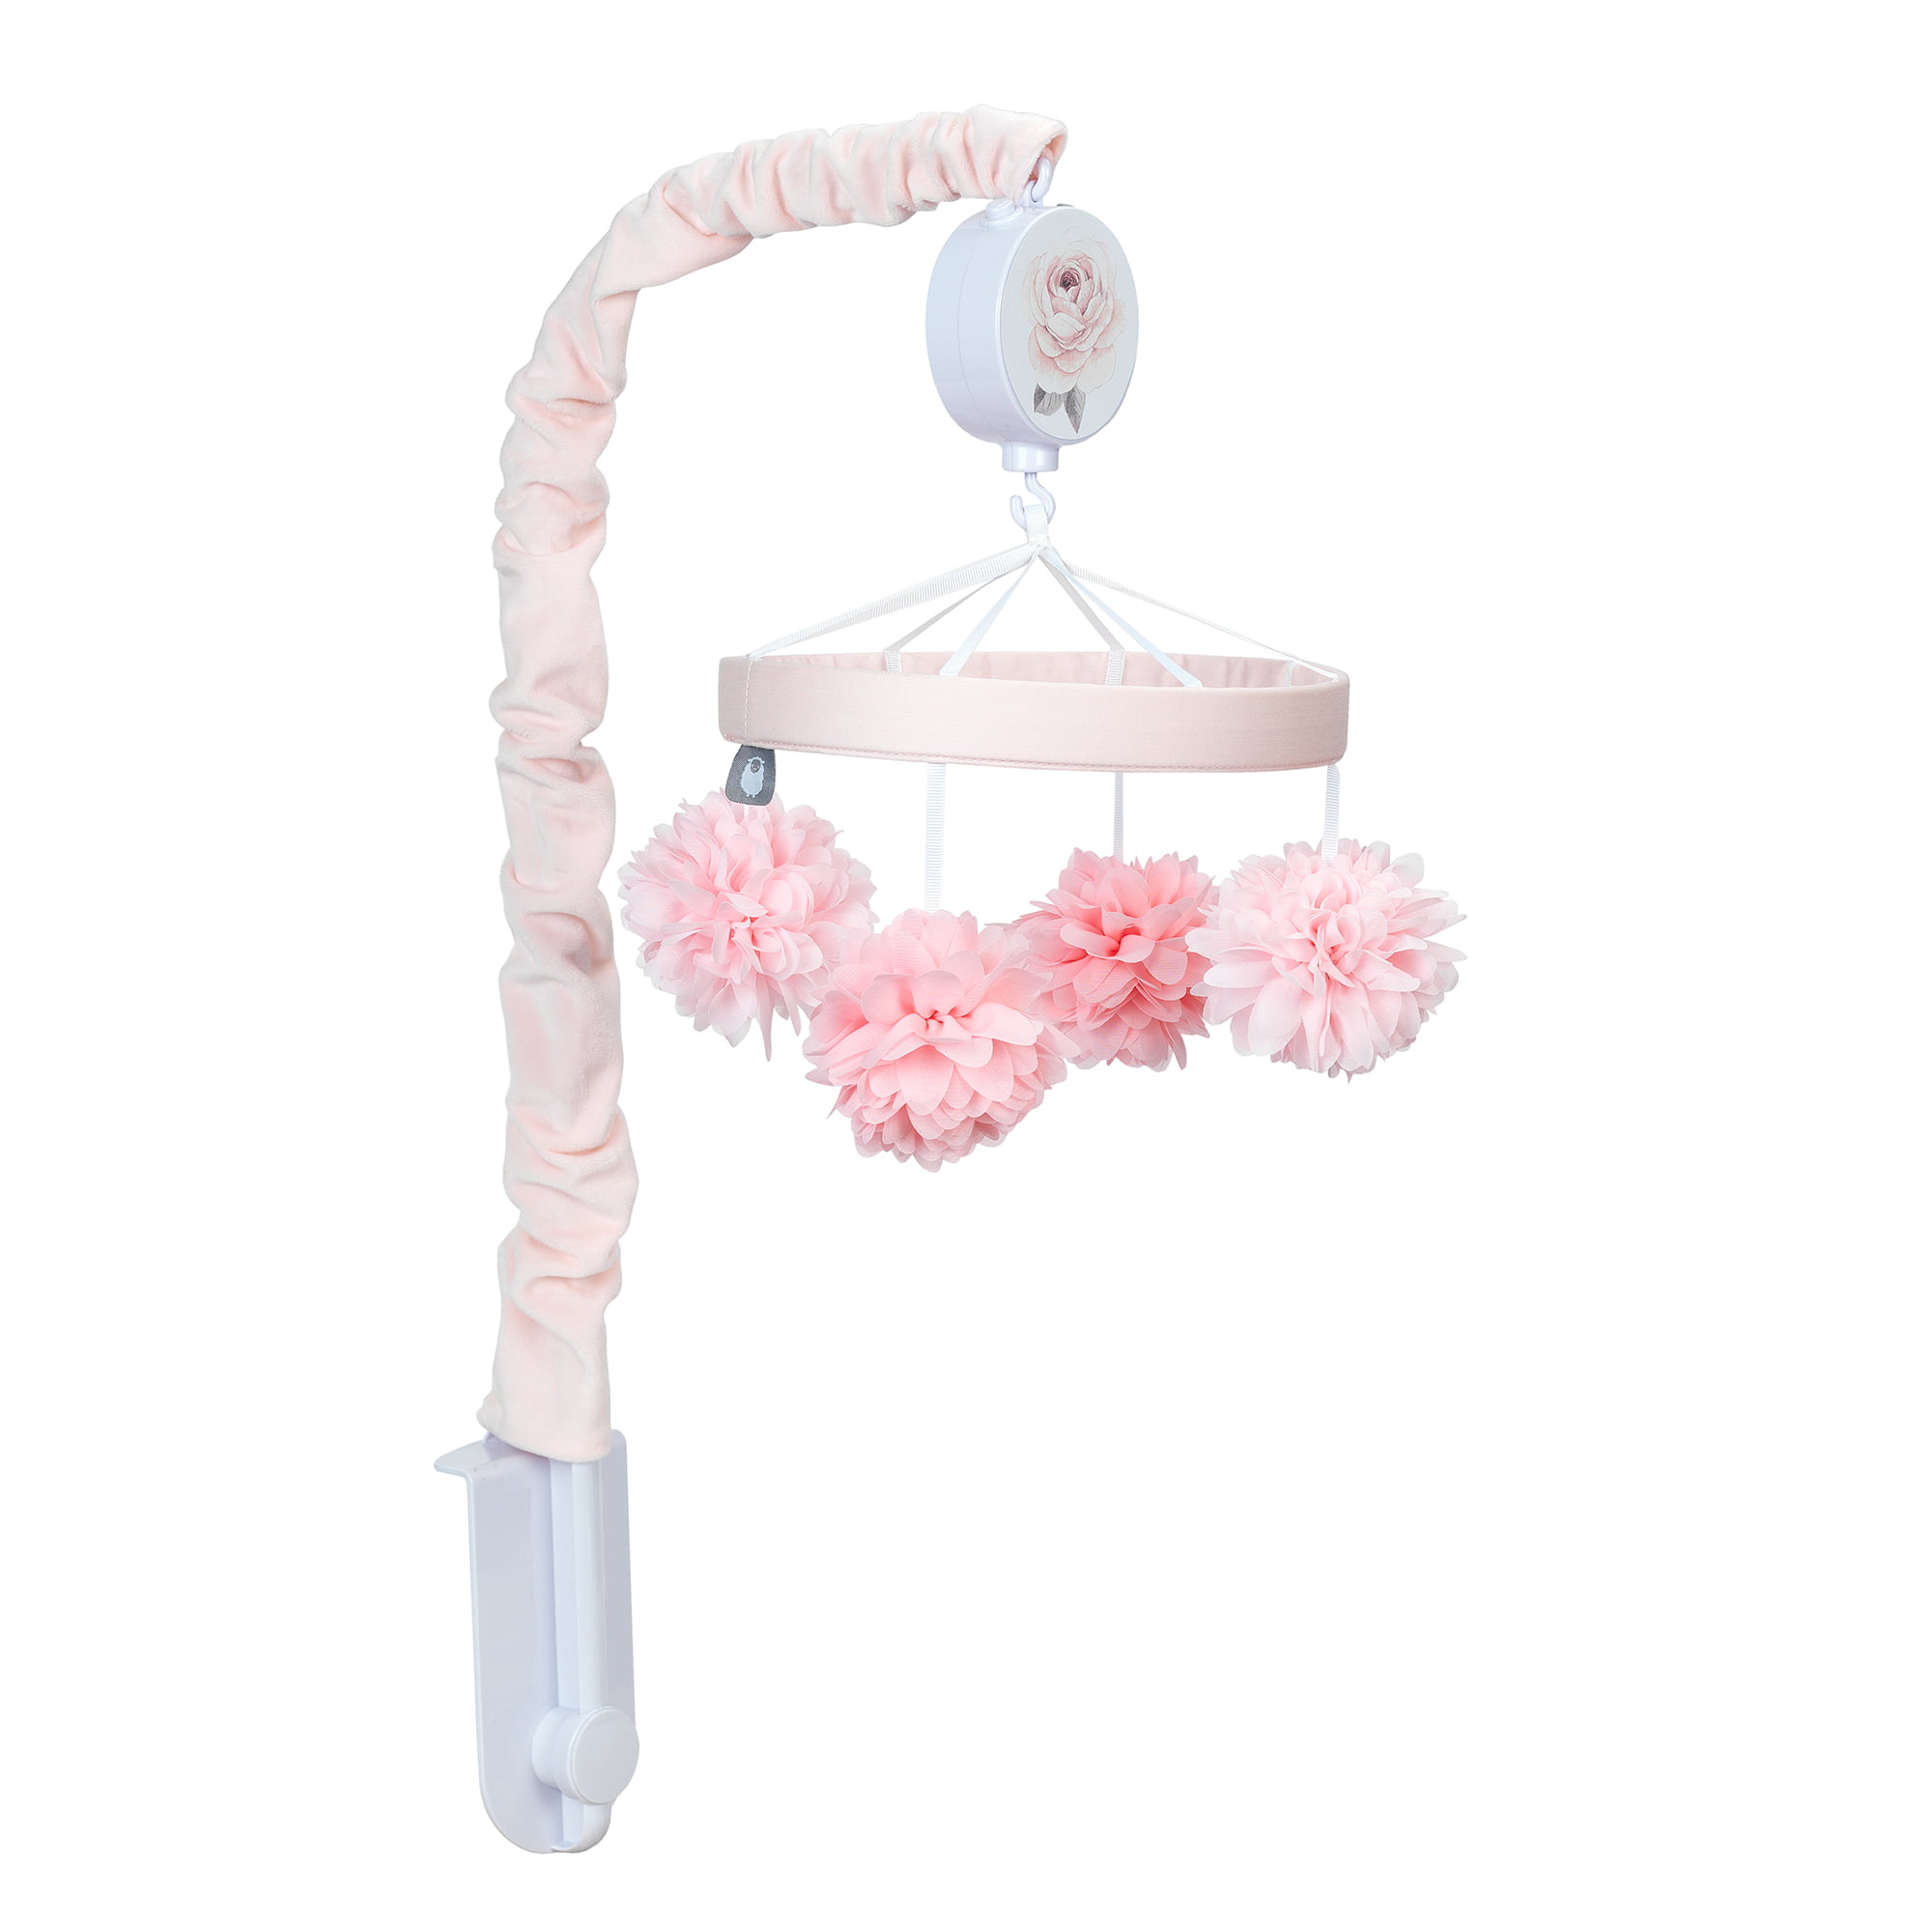 Musical Mobile, Barn - pink light solid with design, Nursery